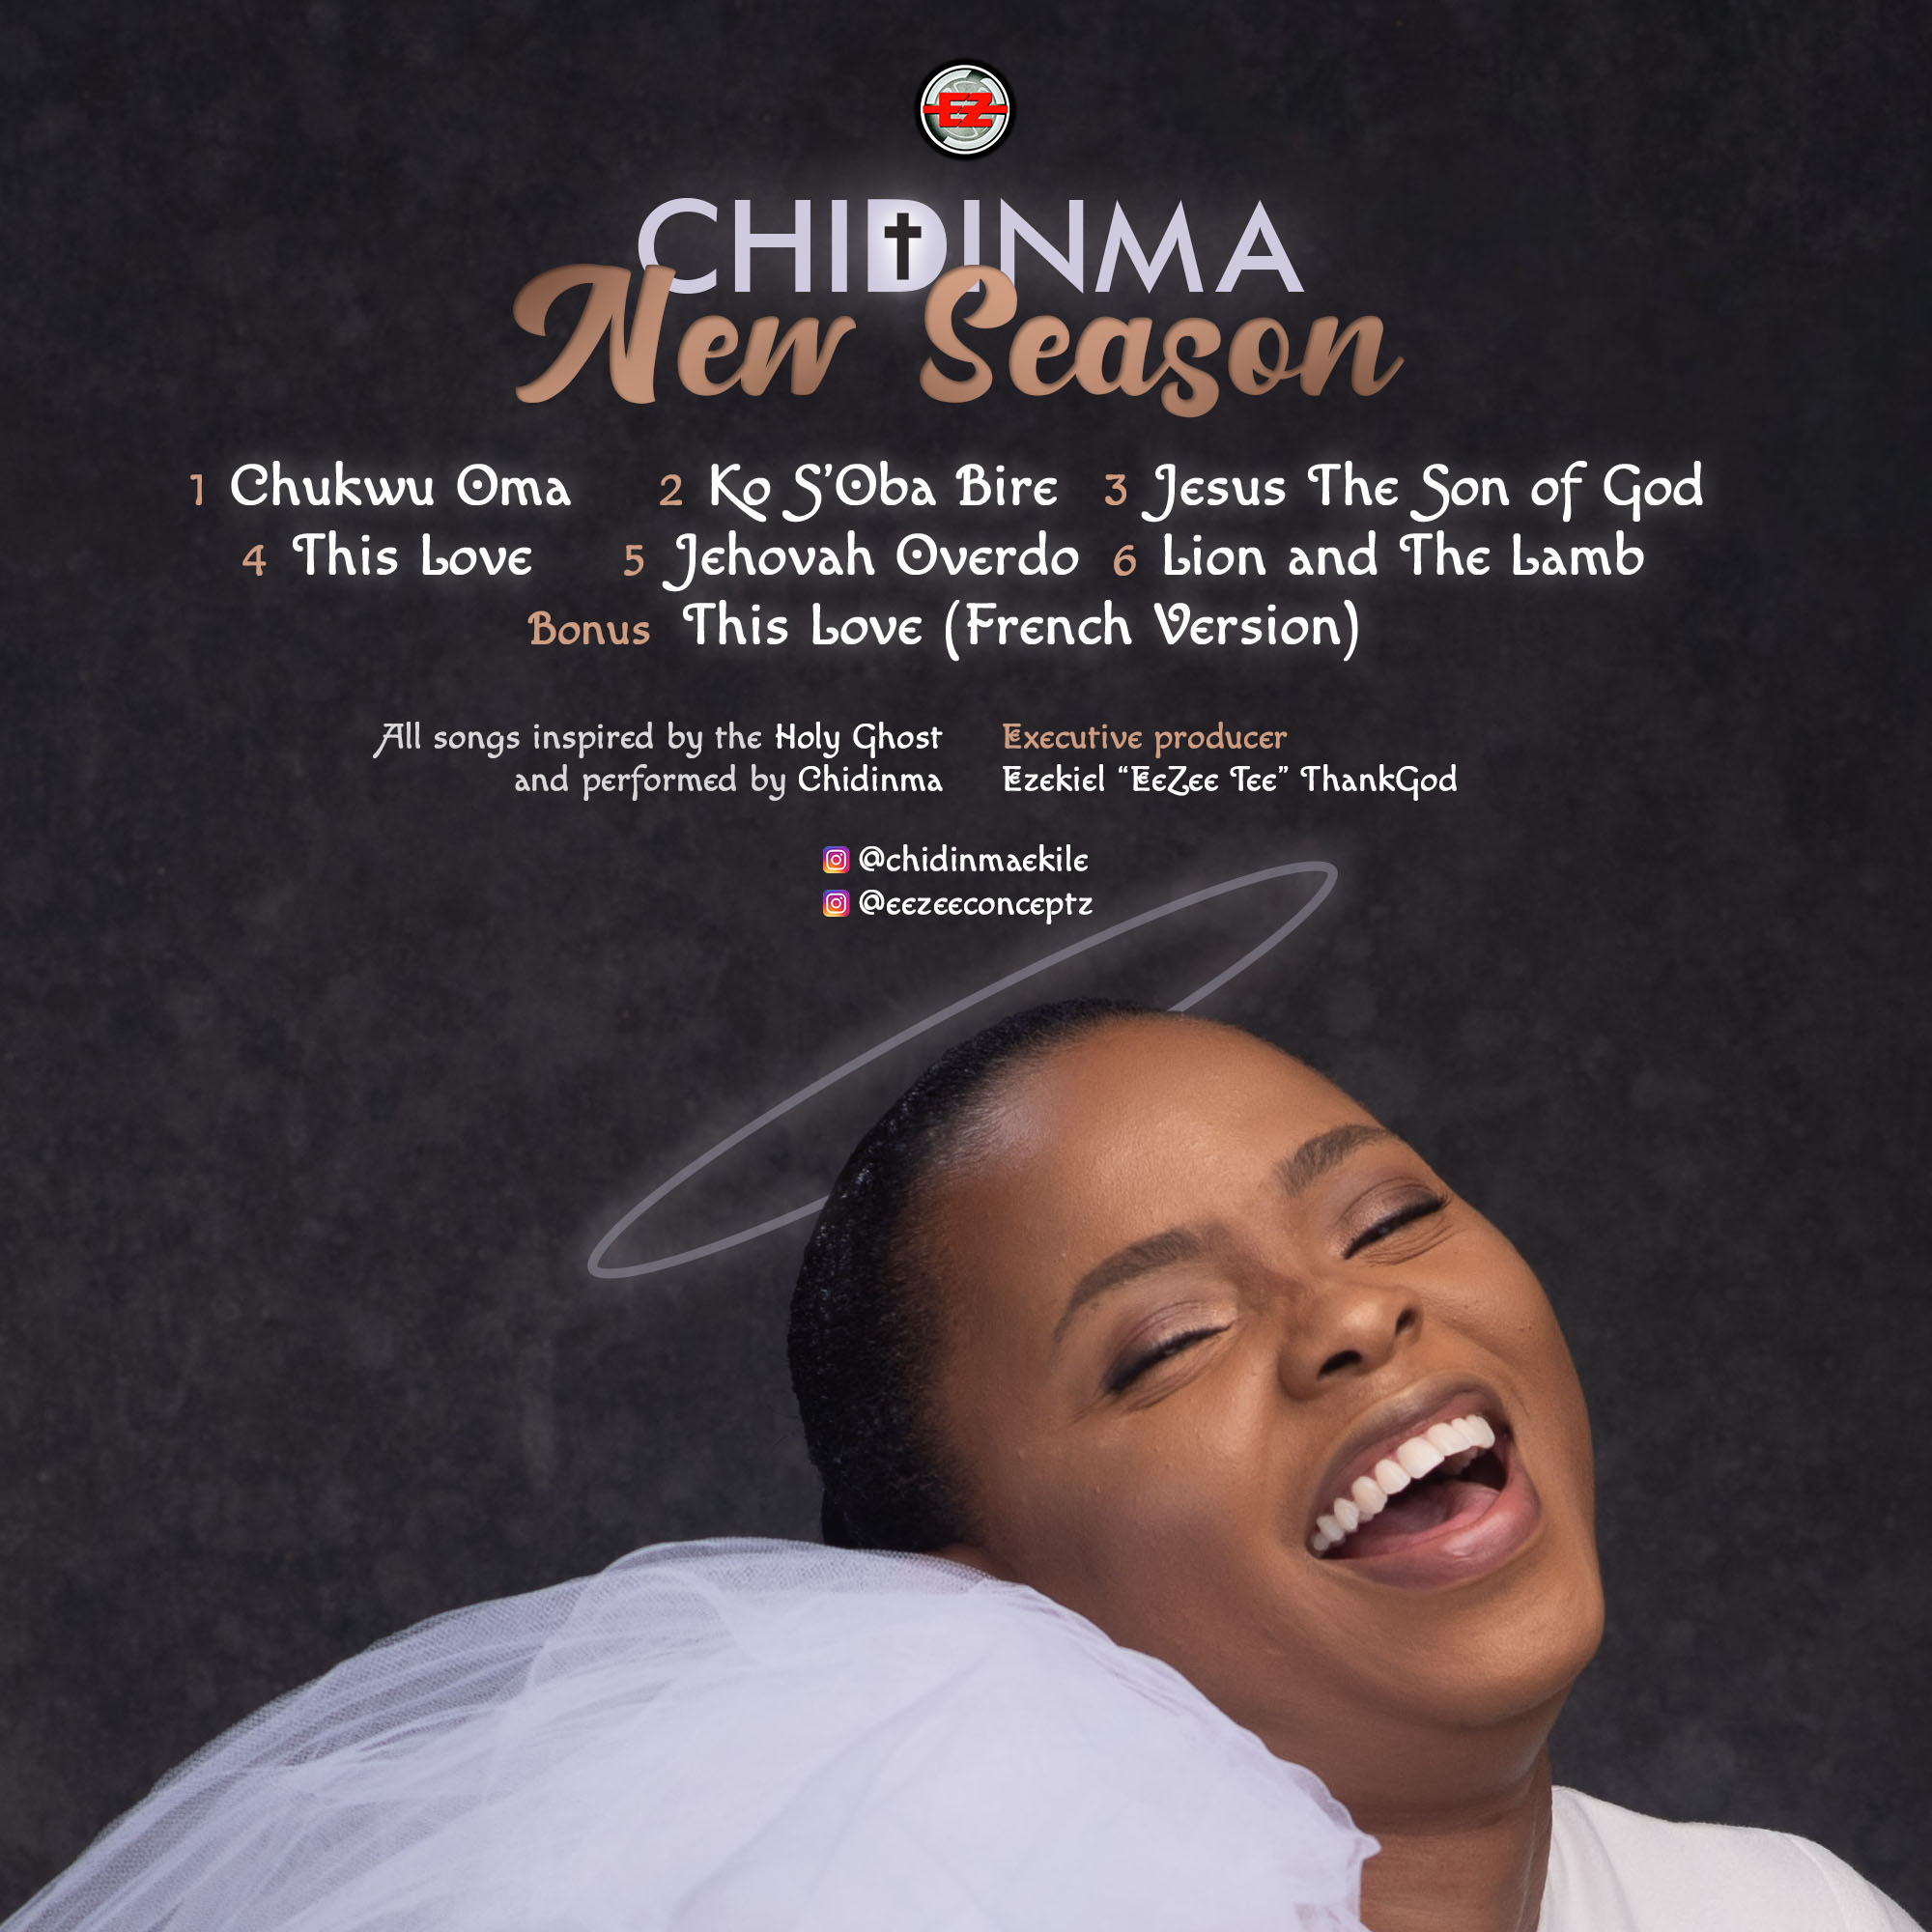 Chidinma Releases “New Season” EP + Video For “Jesus Son Of God” [Feat. The Gratitude]